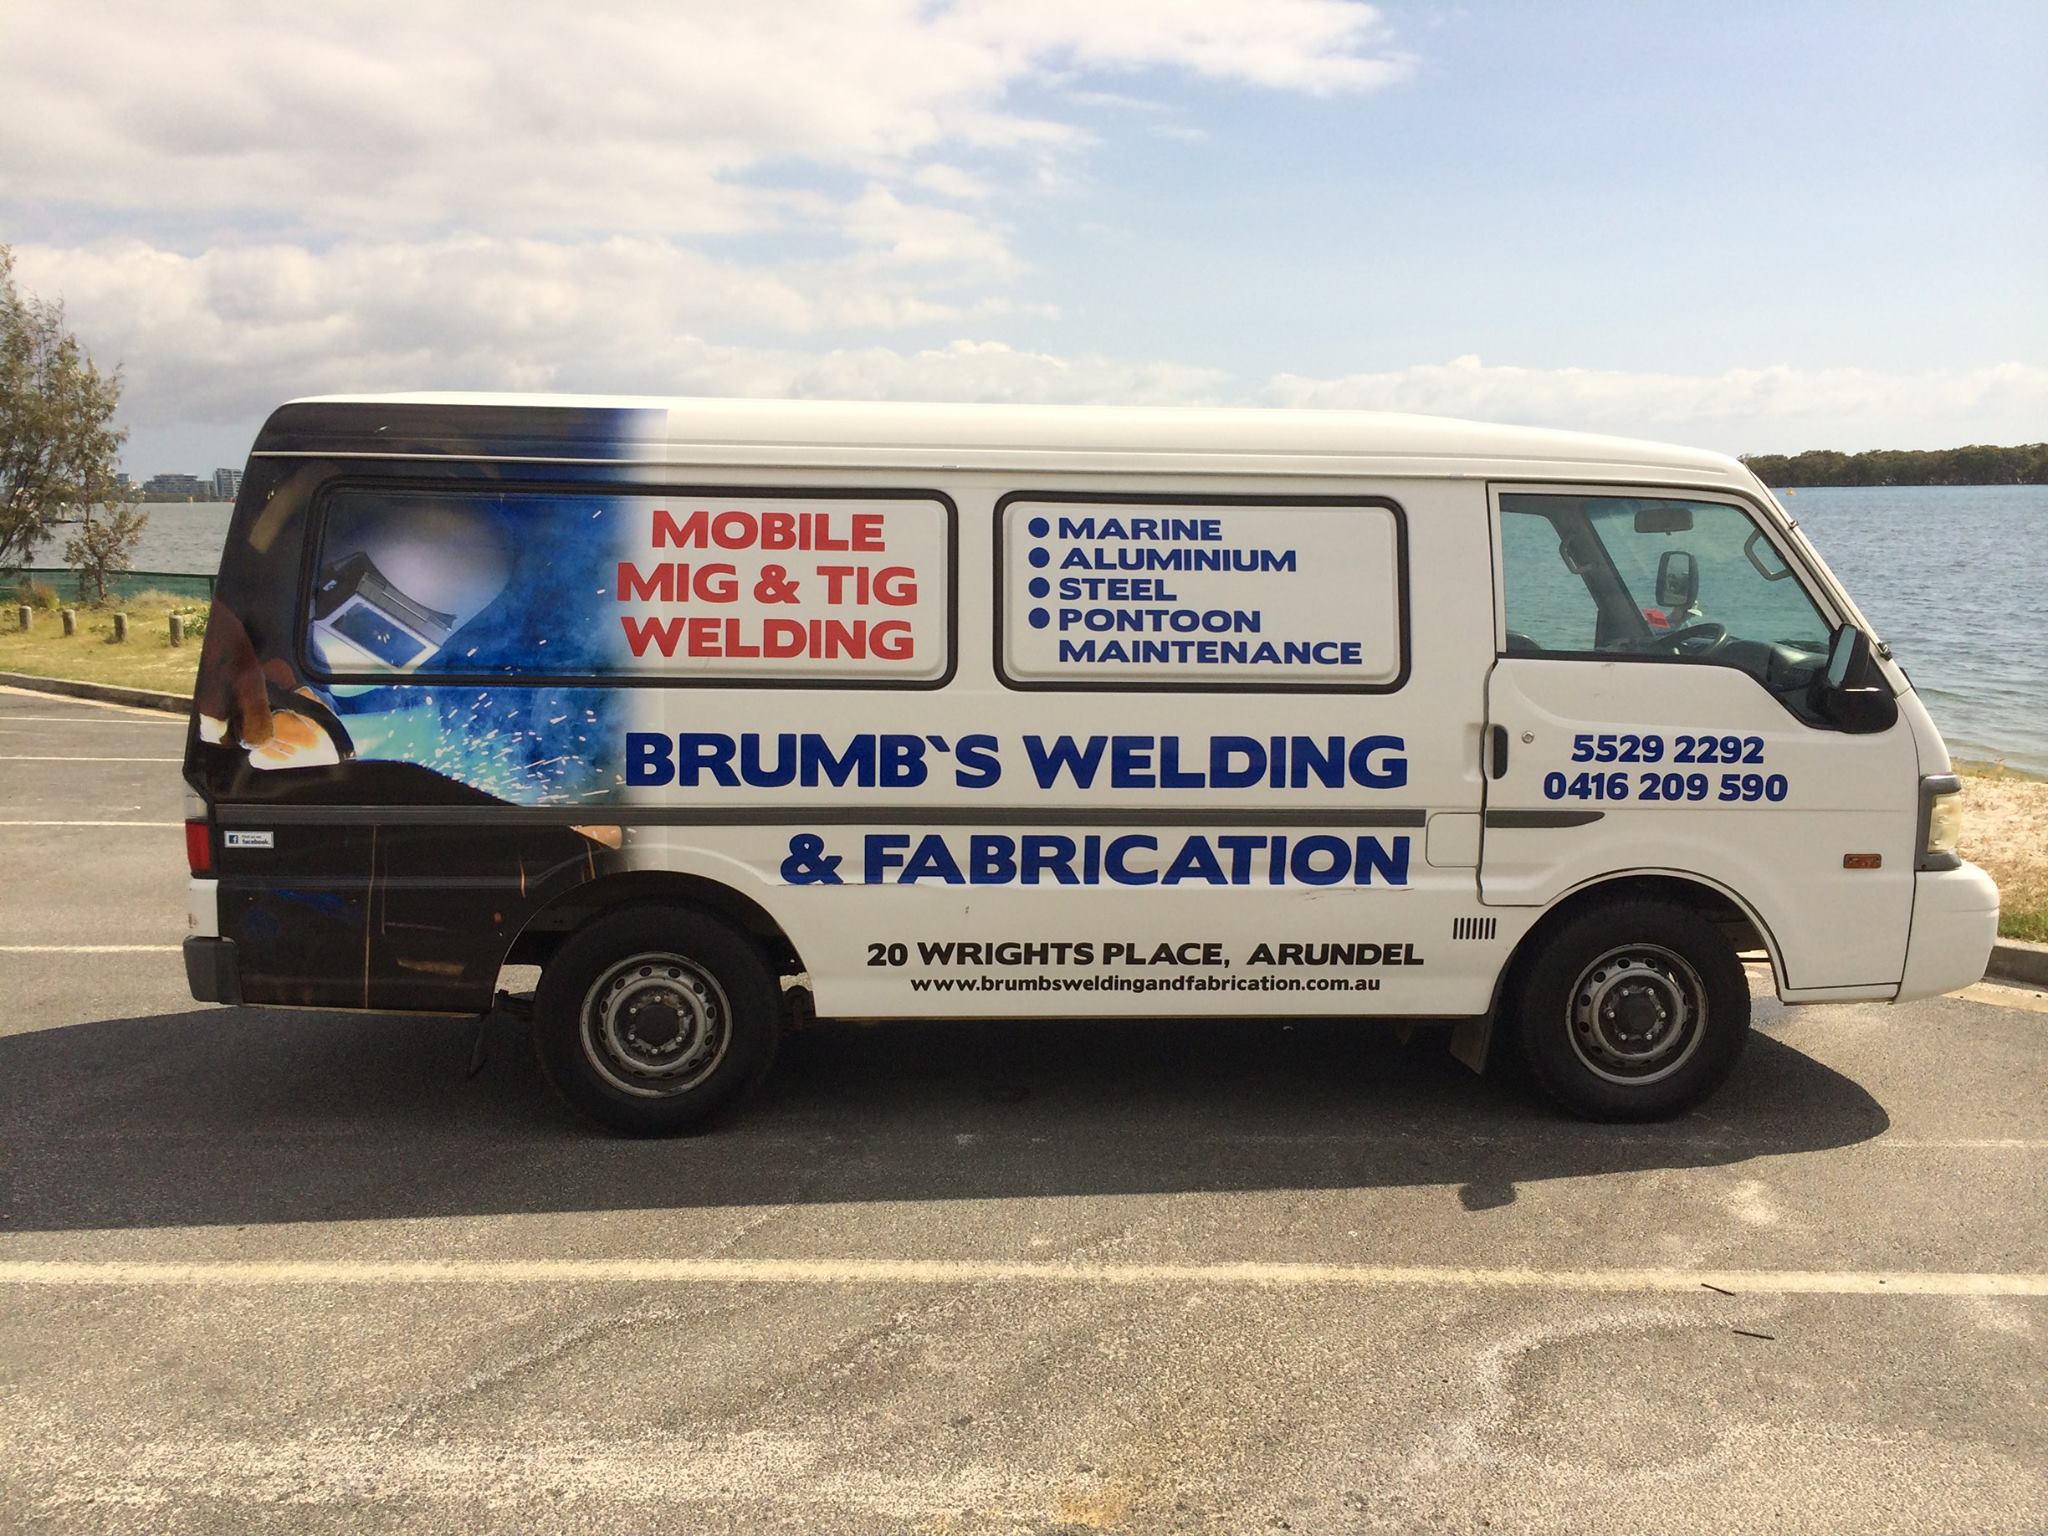 The Brumb's Welding & Fabrication Mobile Van on the Gold Coast